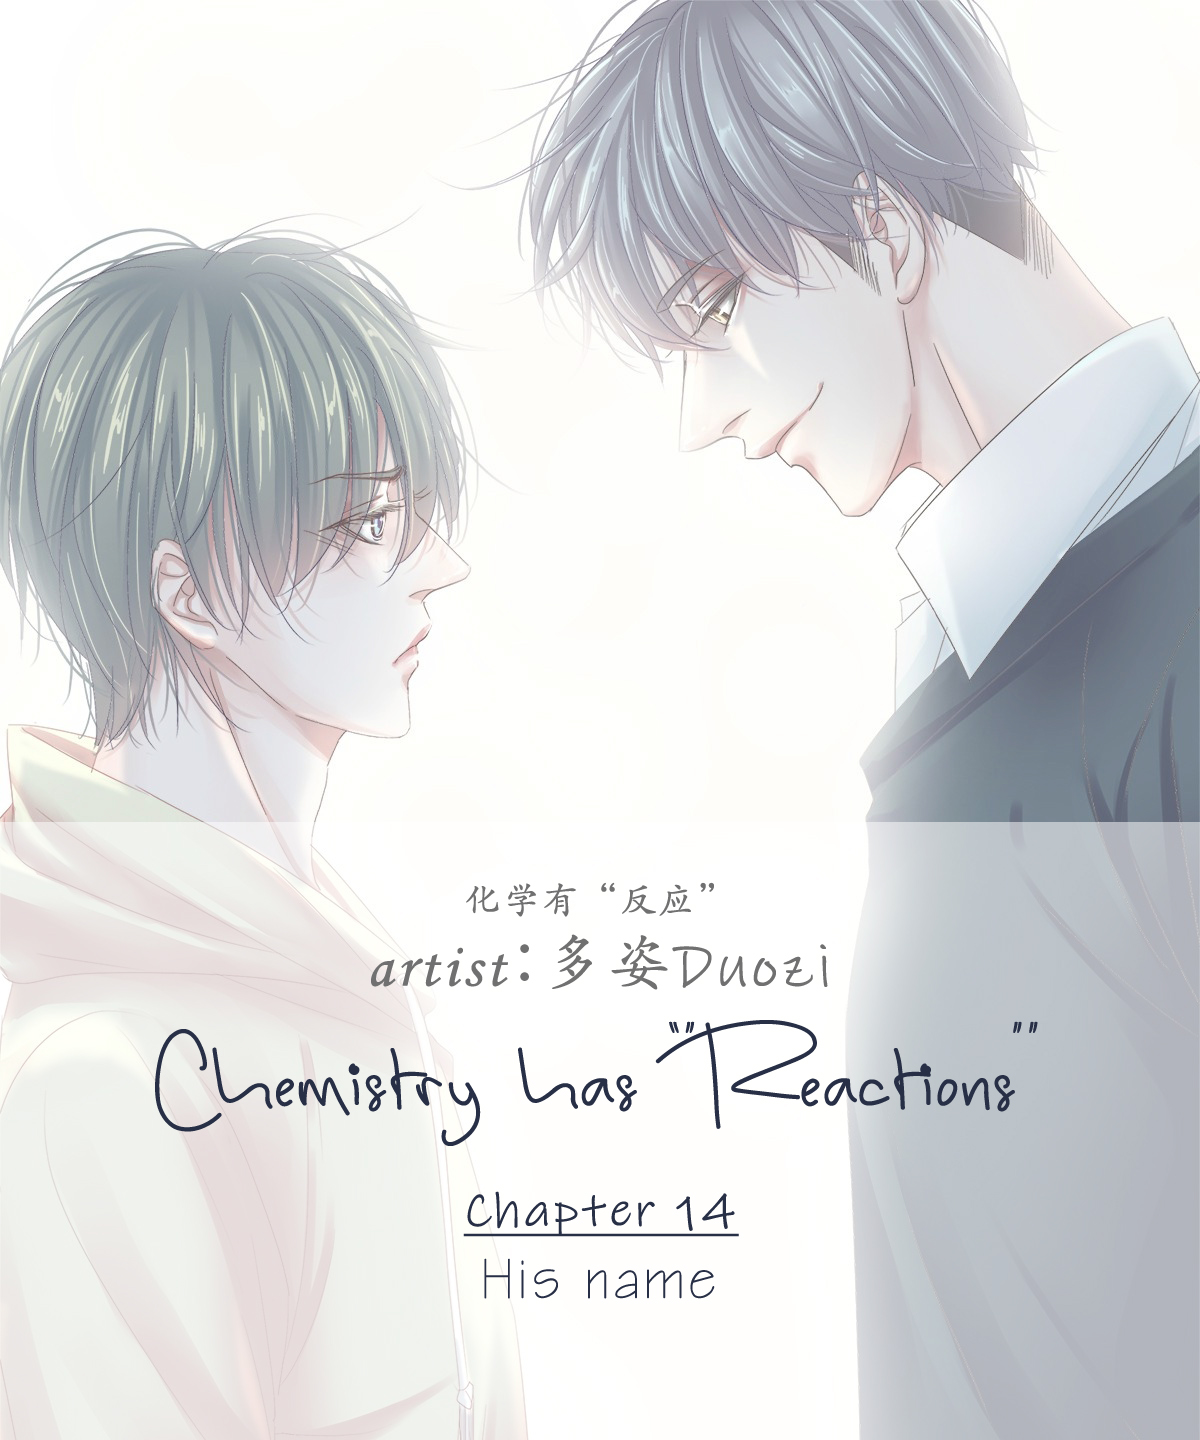 Chemistry has "Reactions" Vol. 1 Ch. 14